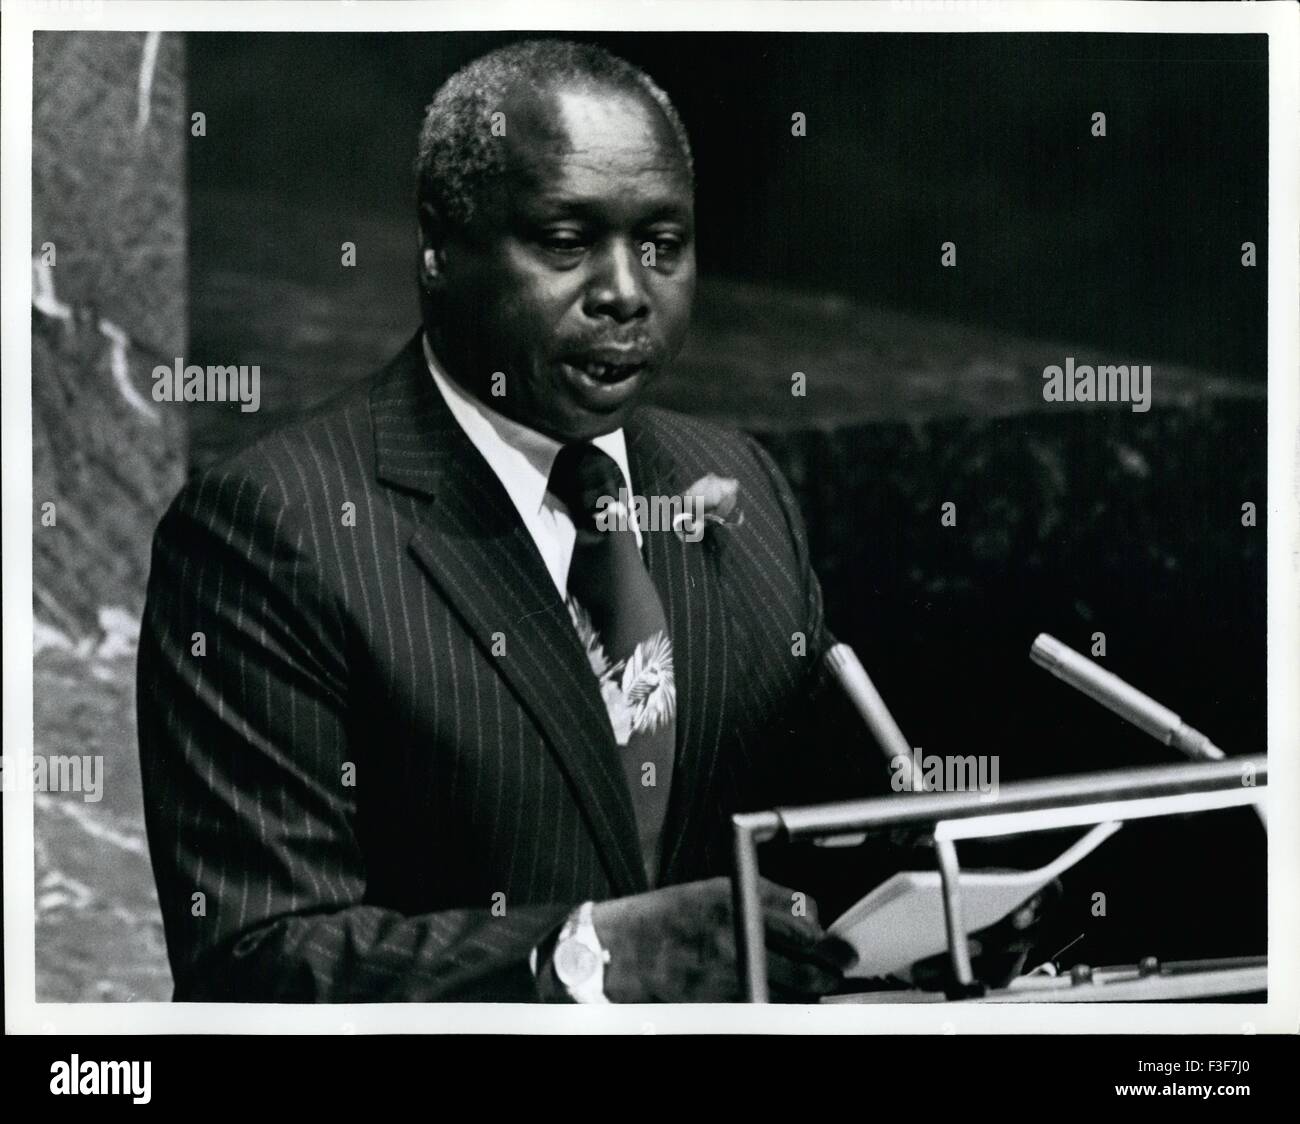 1981 - Fall 1981The United Nations New York The President of Kenya Mr. Daniel Arap Moi addressed the thirty sixth General Assembly. © Keystone Pictures USA/ZUMAPRESS.com/Alamy Live News Stock Photo